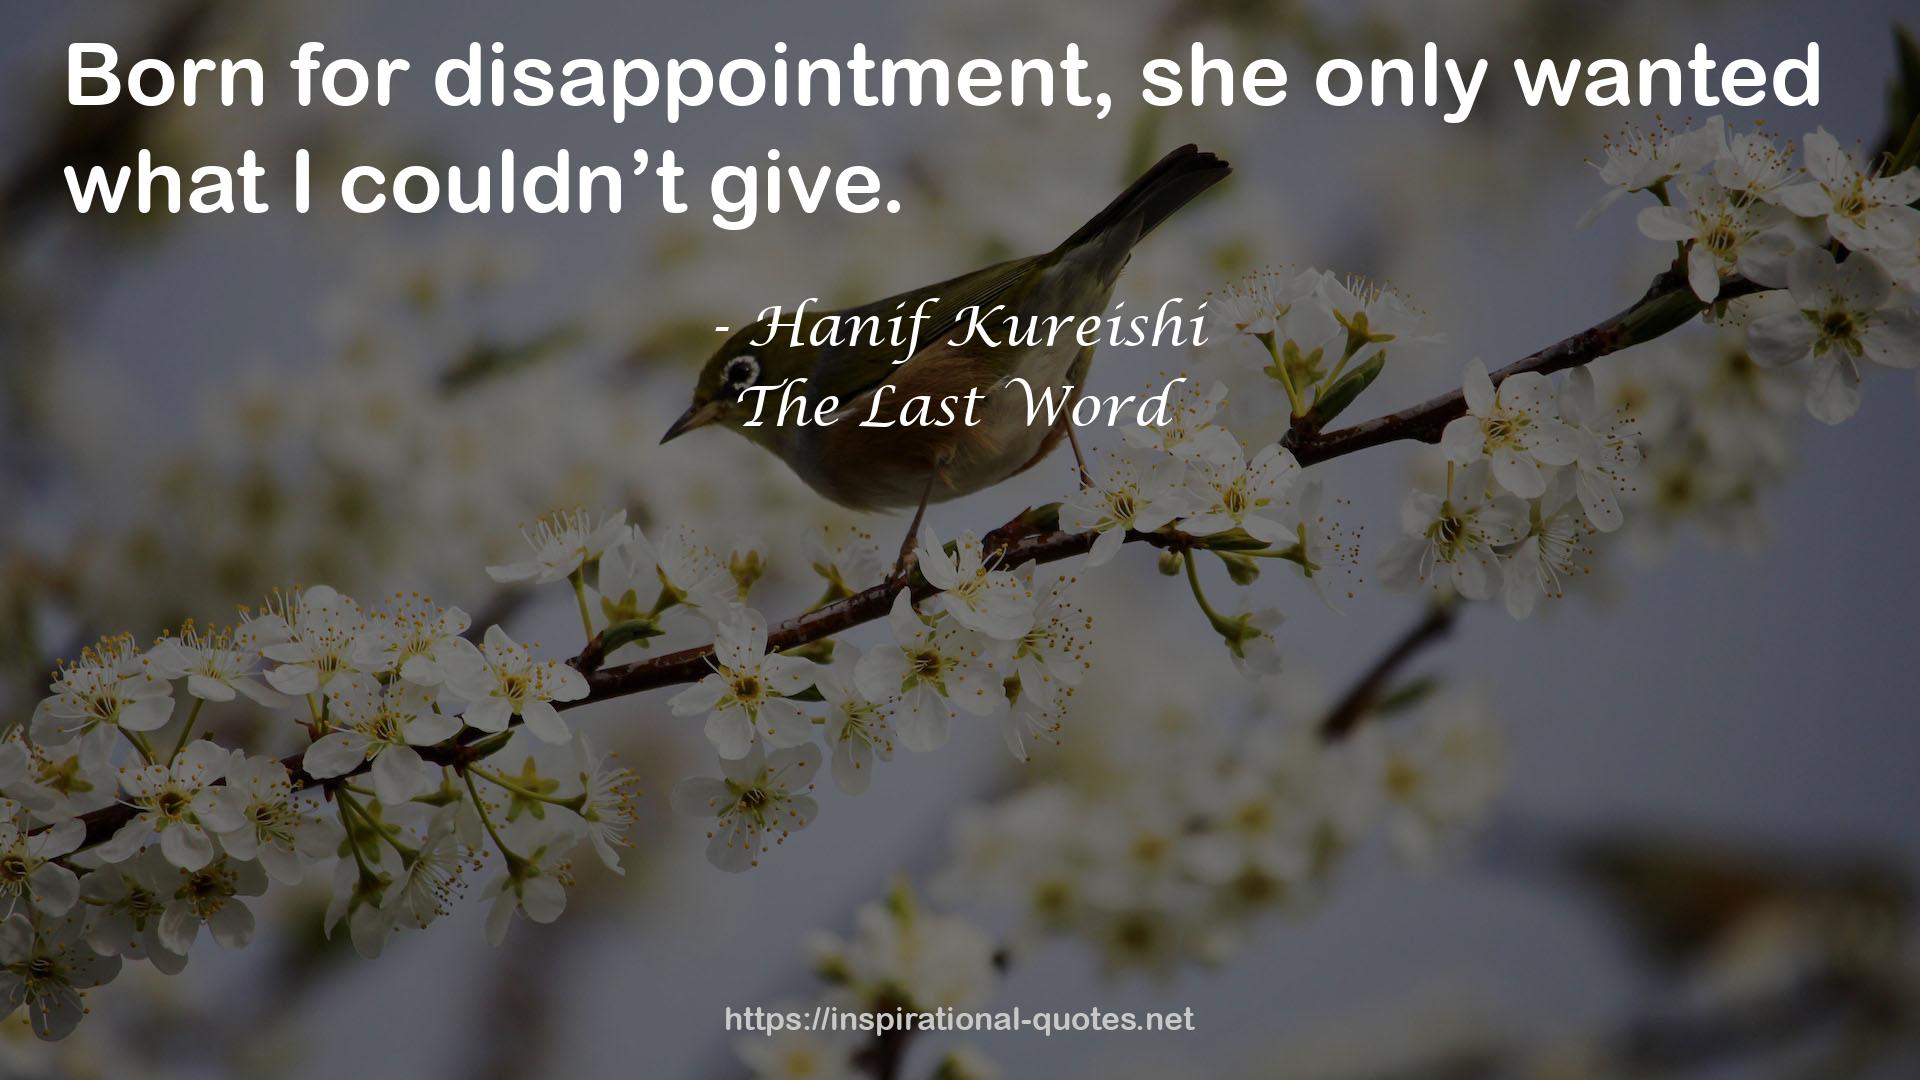 The Last Word QUOTES